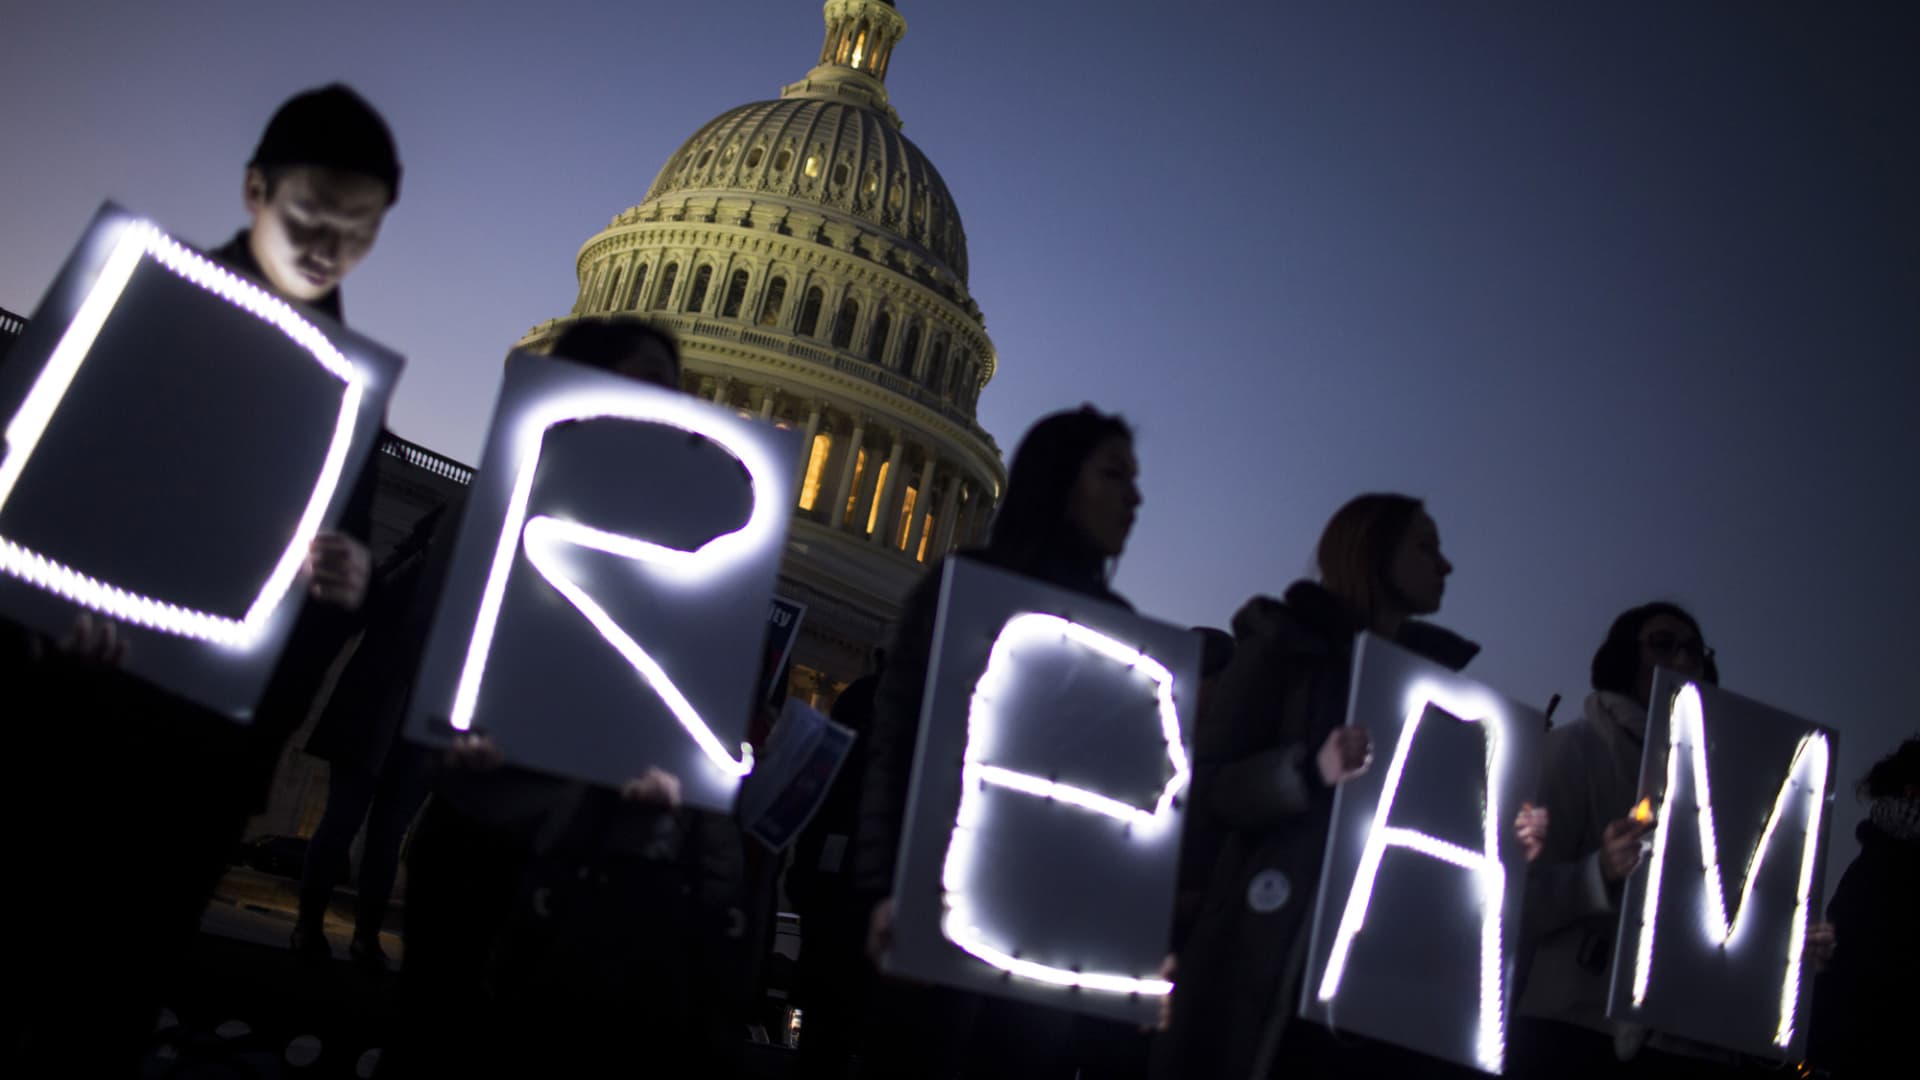 Demonstrators hold illuminated signs during a rally supporting the Deferred Action for Childhood Arrivals program (DACA), or the Dream Act, outside the U.S. Capitol building in Washington, D.C., Jan. 18, 2018.